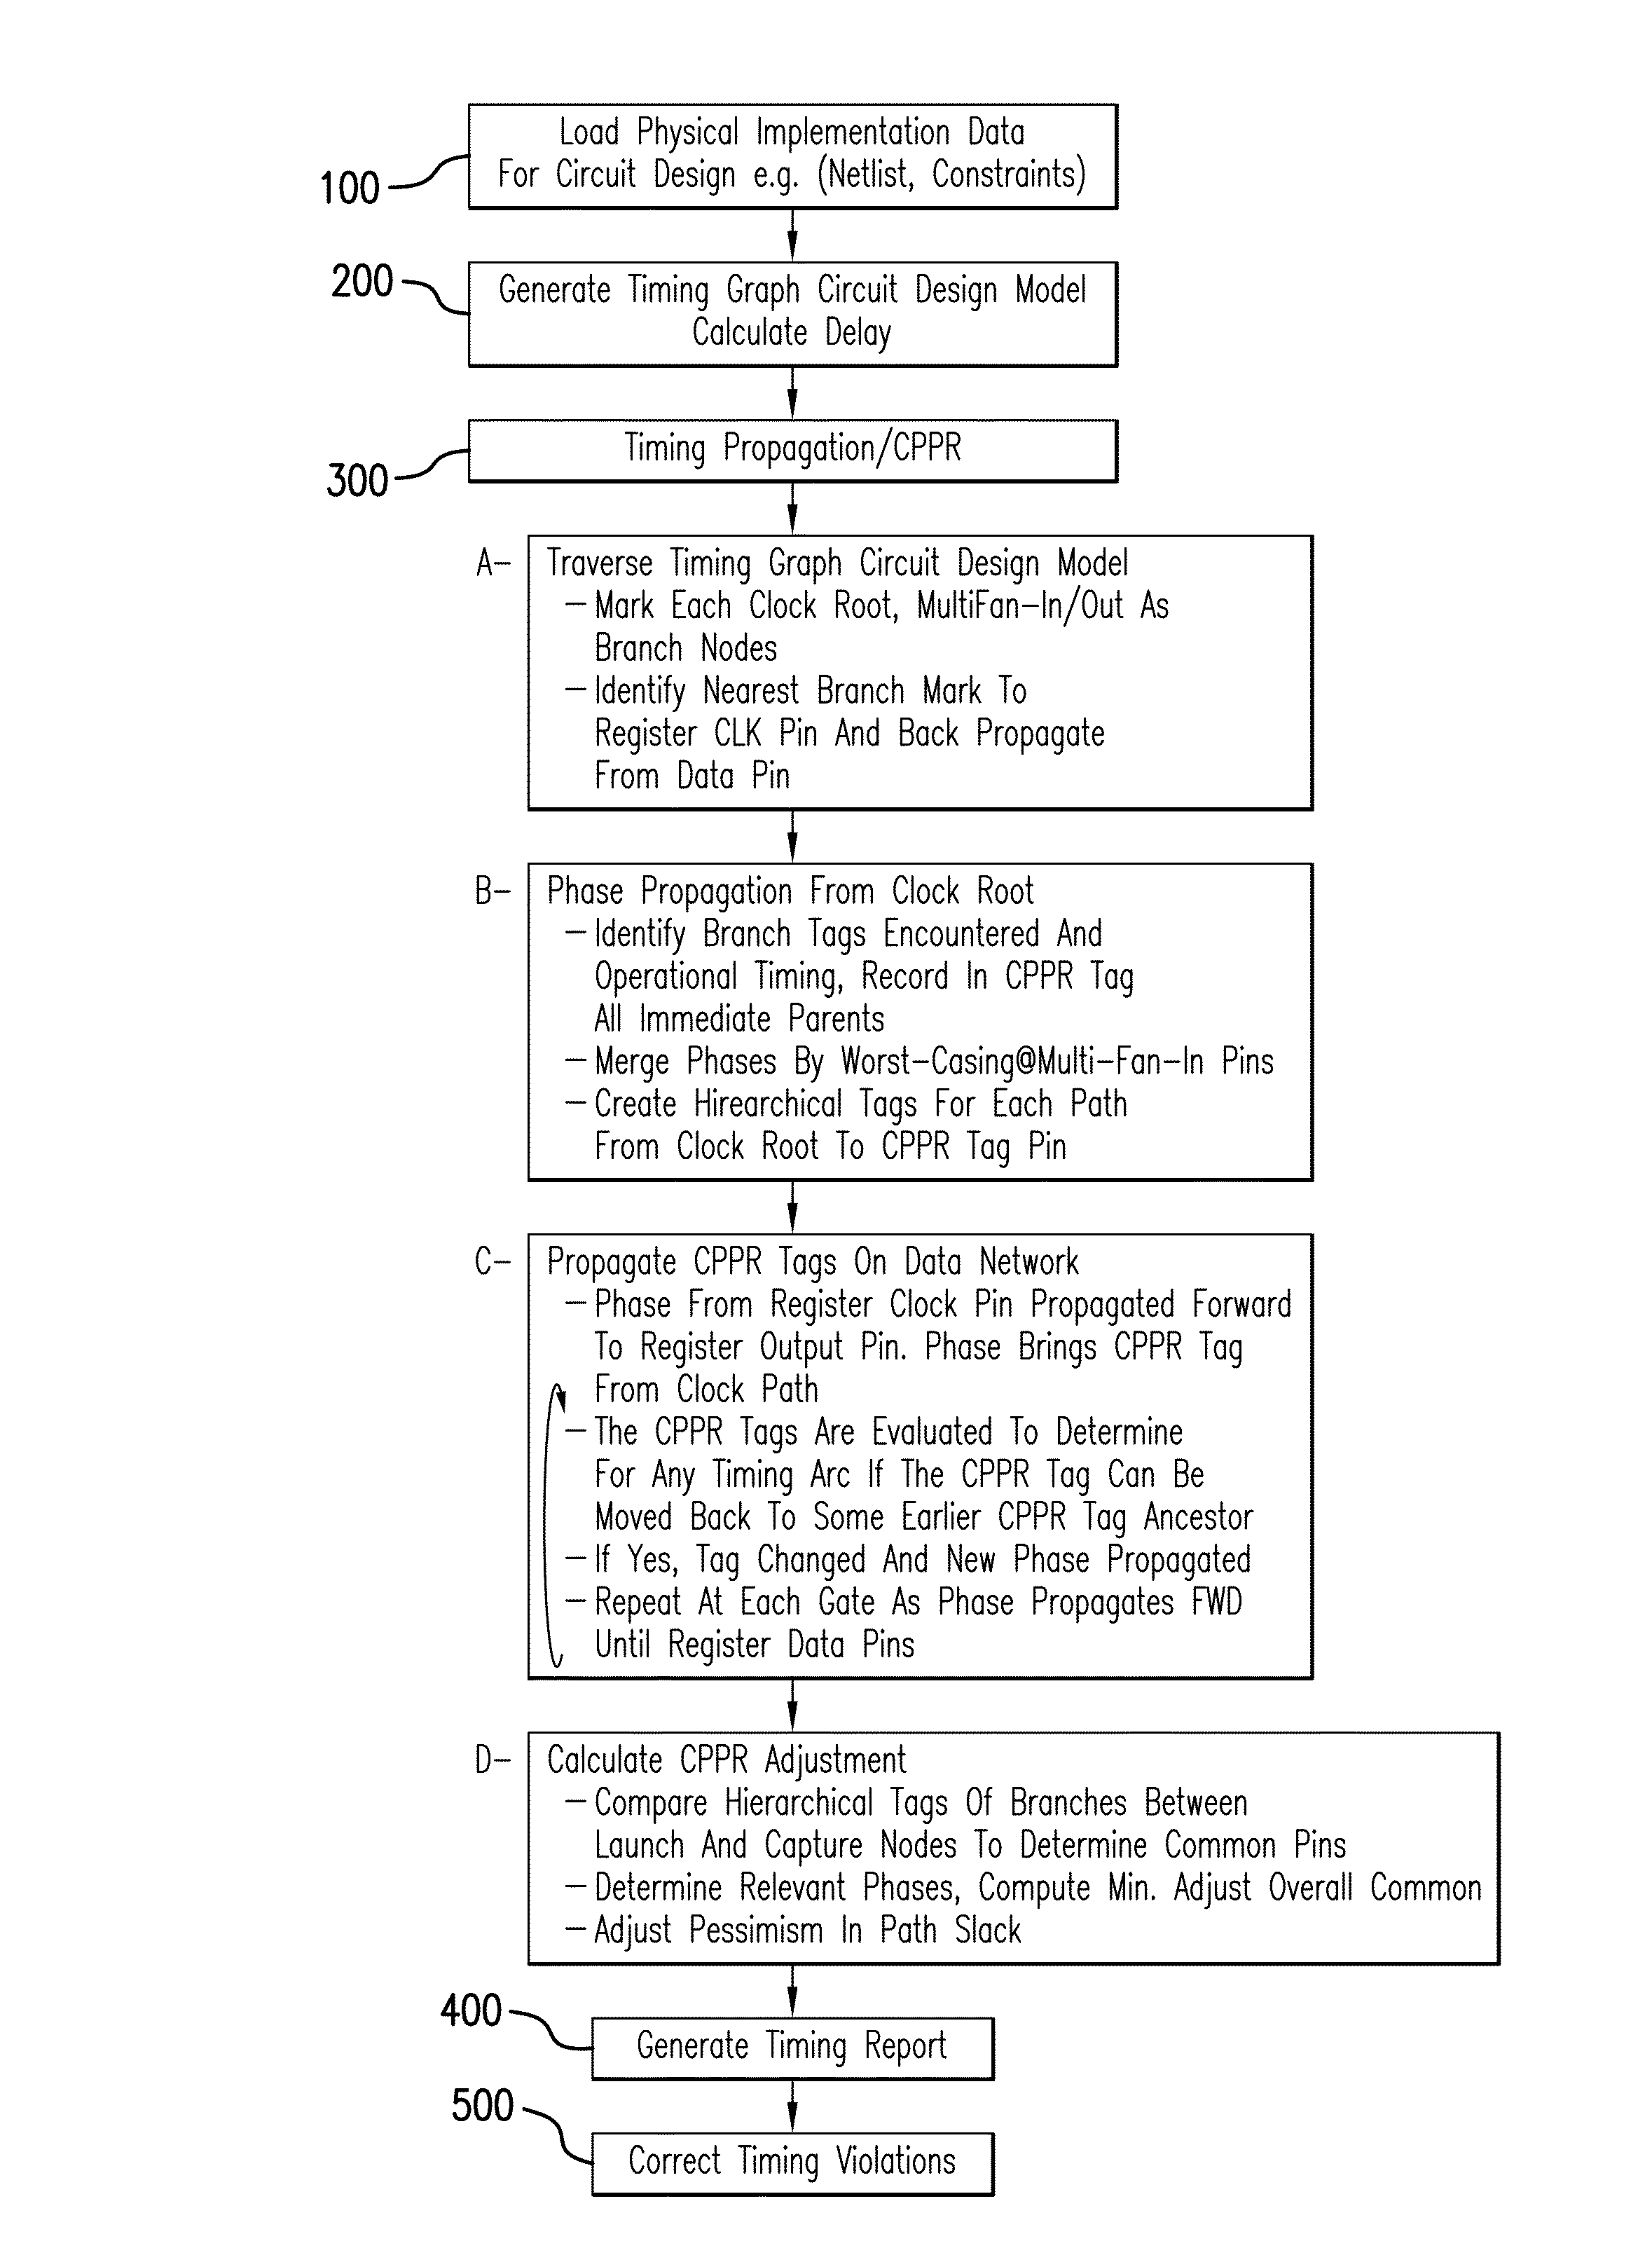 System and method for common path pessimism reduction in timing analysis to guide remedial transformations of a circuit design